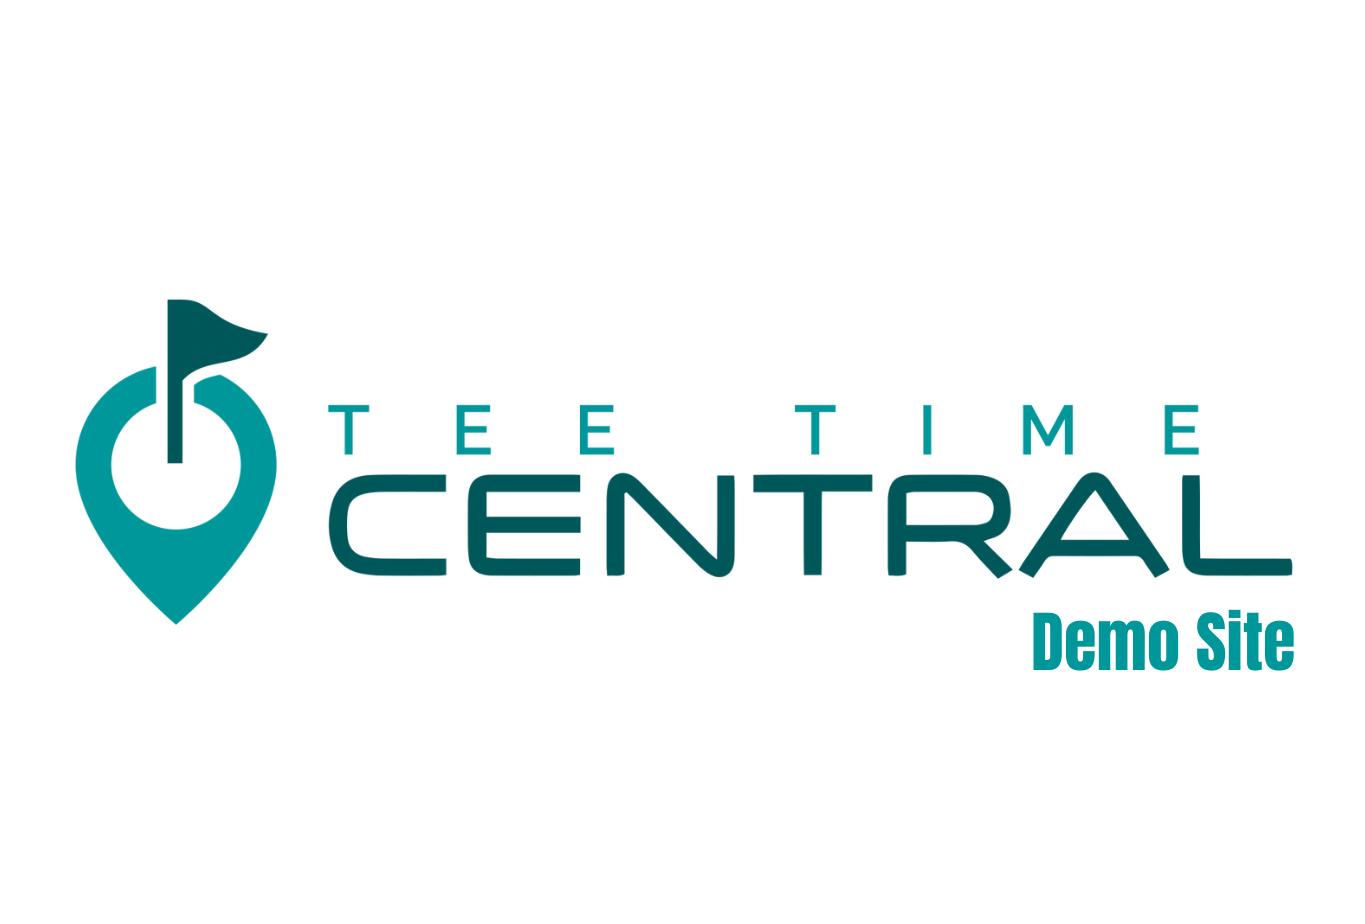 Tee Time Central Demo